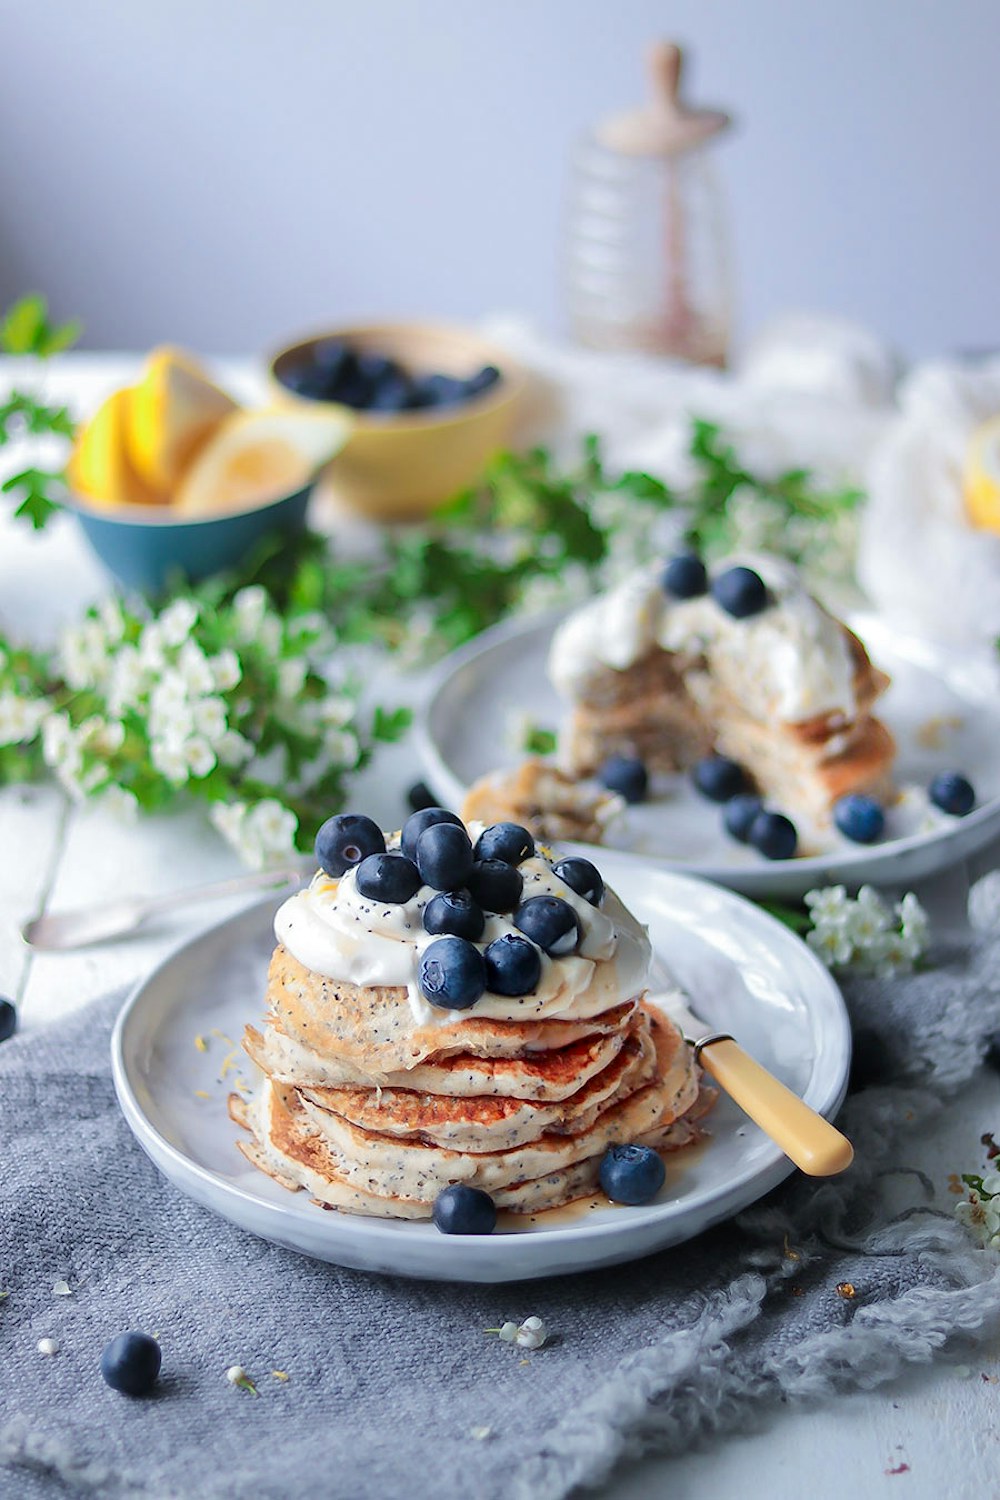 Lemon and Poppy Seed Pancakes with Creamy Cheese and Yogurt Topping